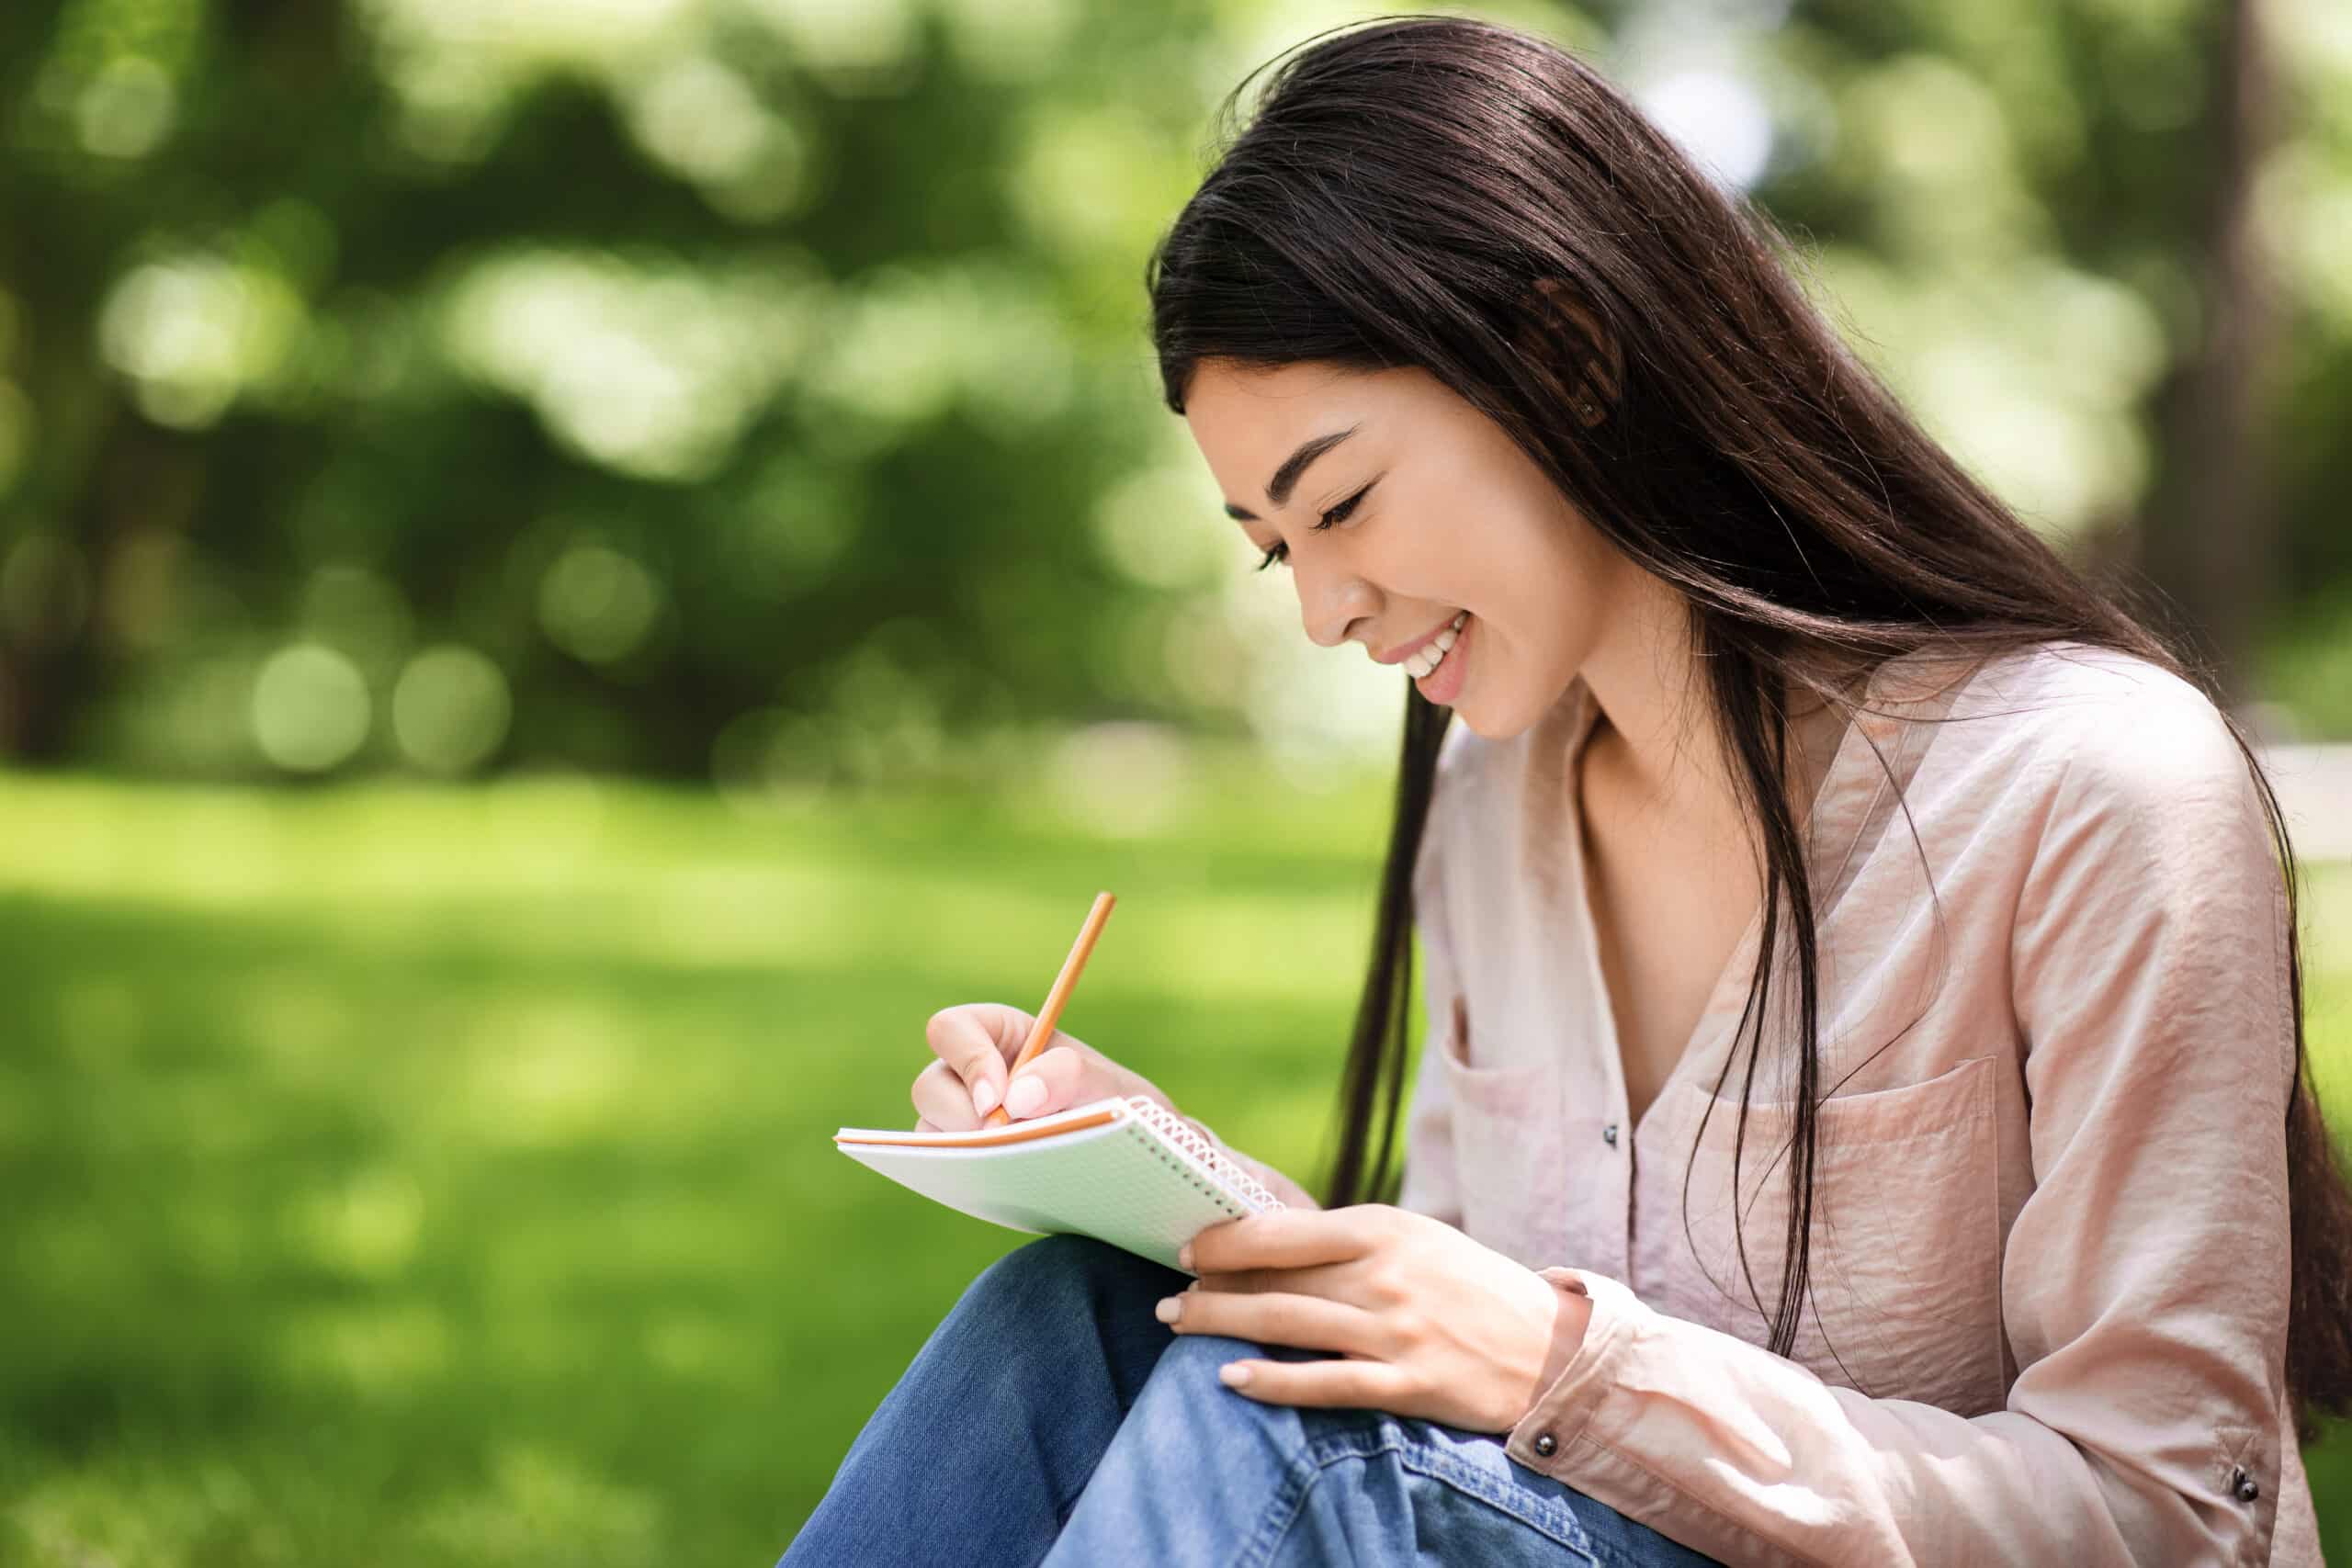 Young Asian girl writing outdoor in the park.